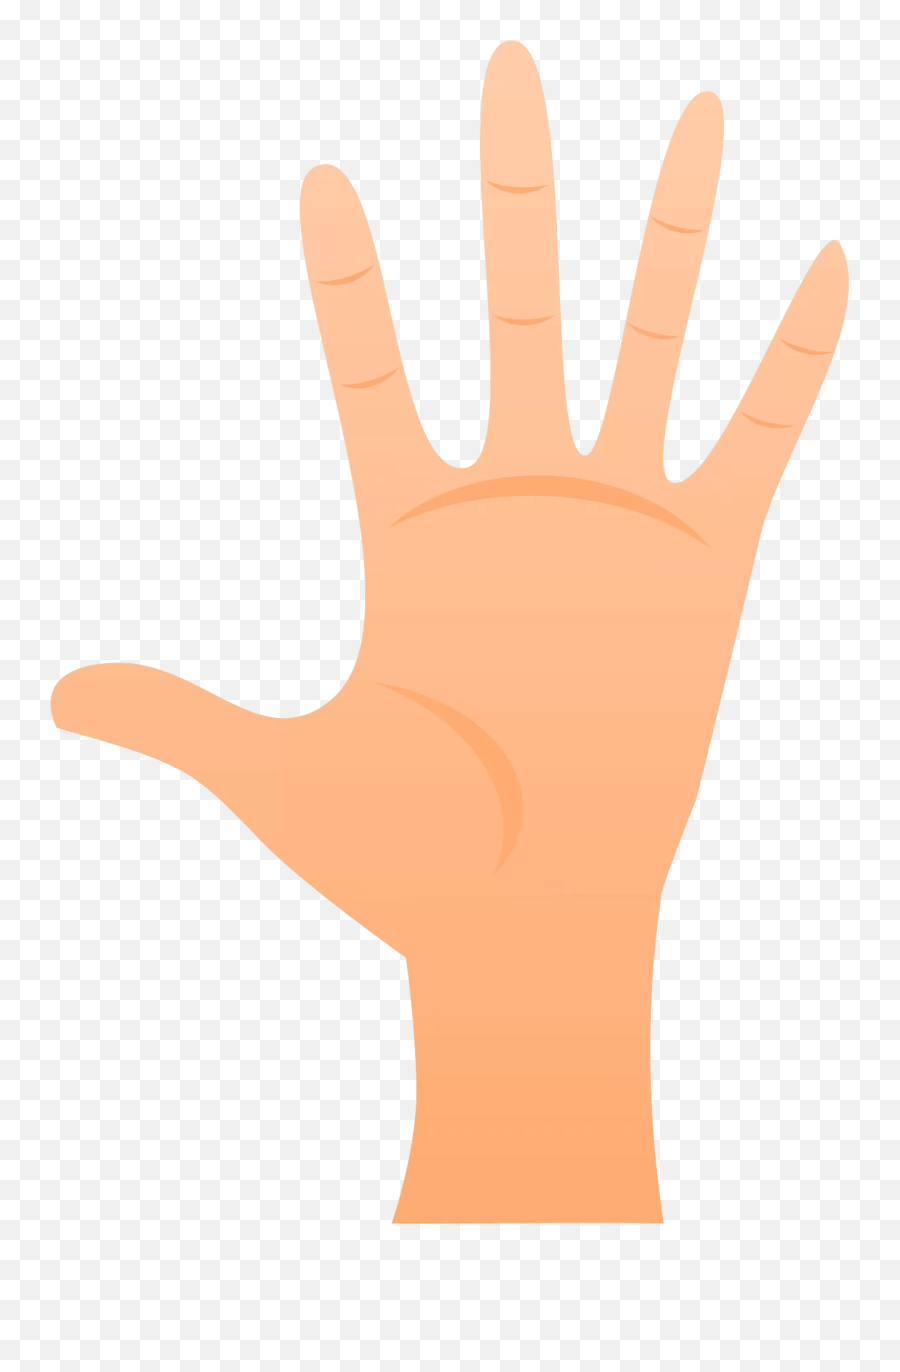 Hand Clipart U0026 Free Hand Images Collection - Clipartflare Emoji,Open Hands Emoji Png